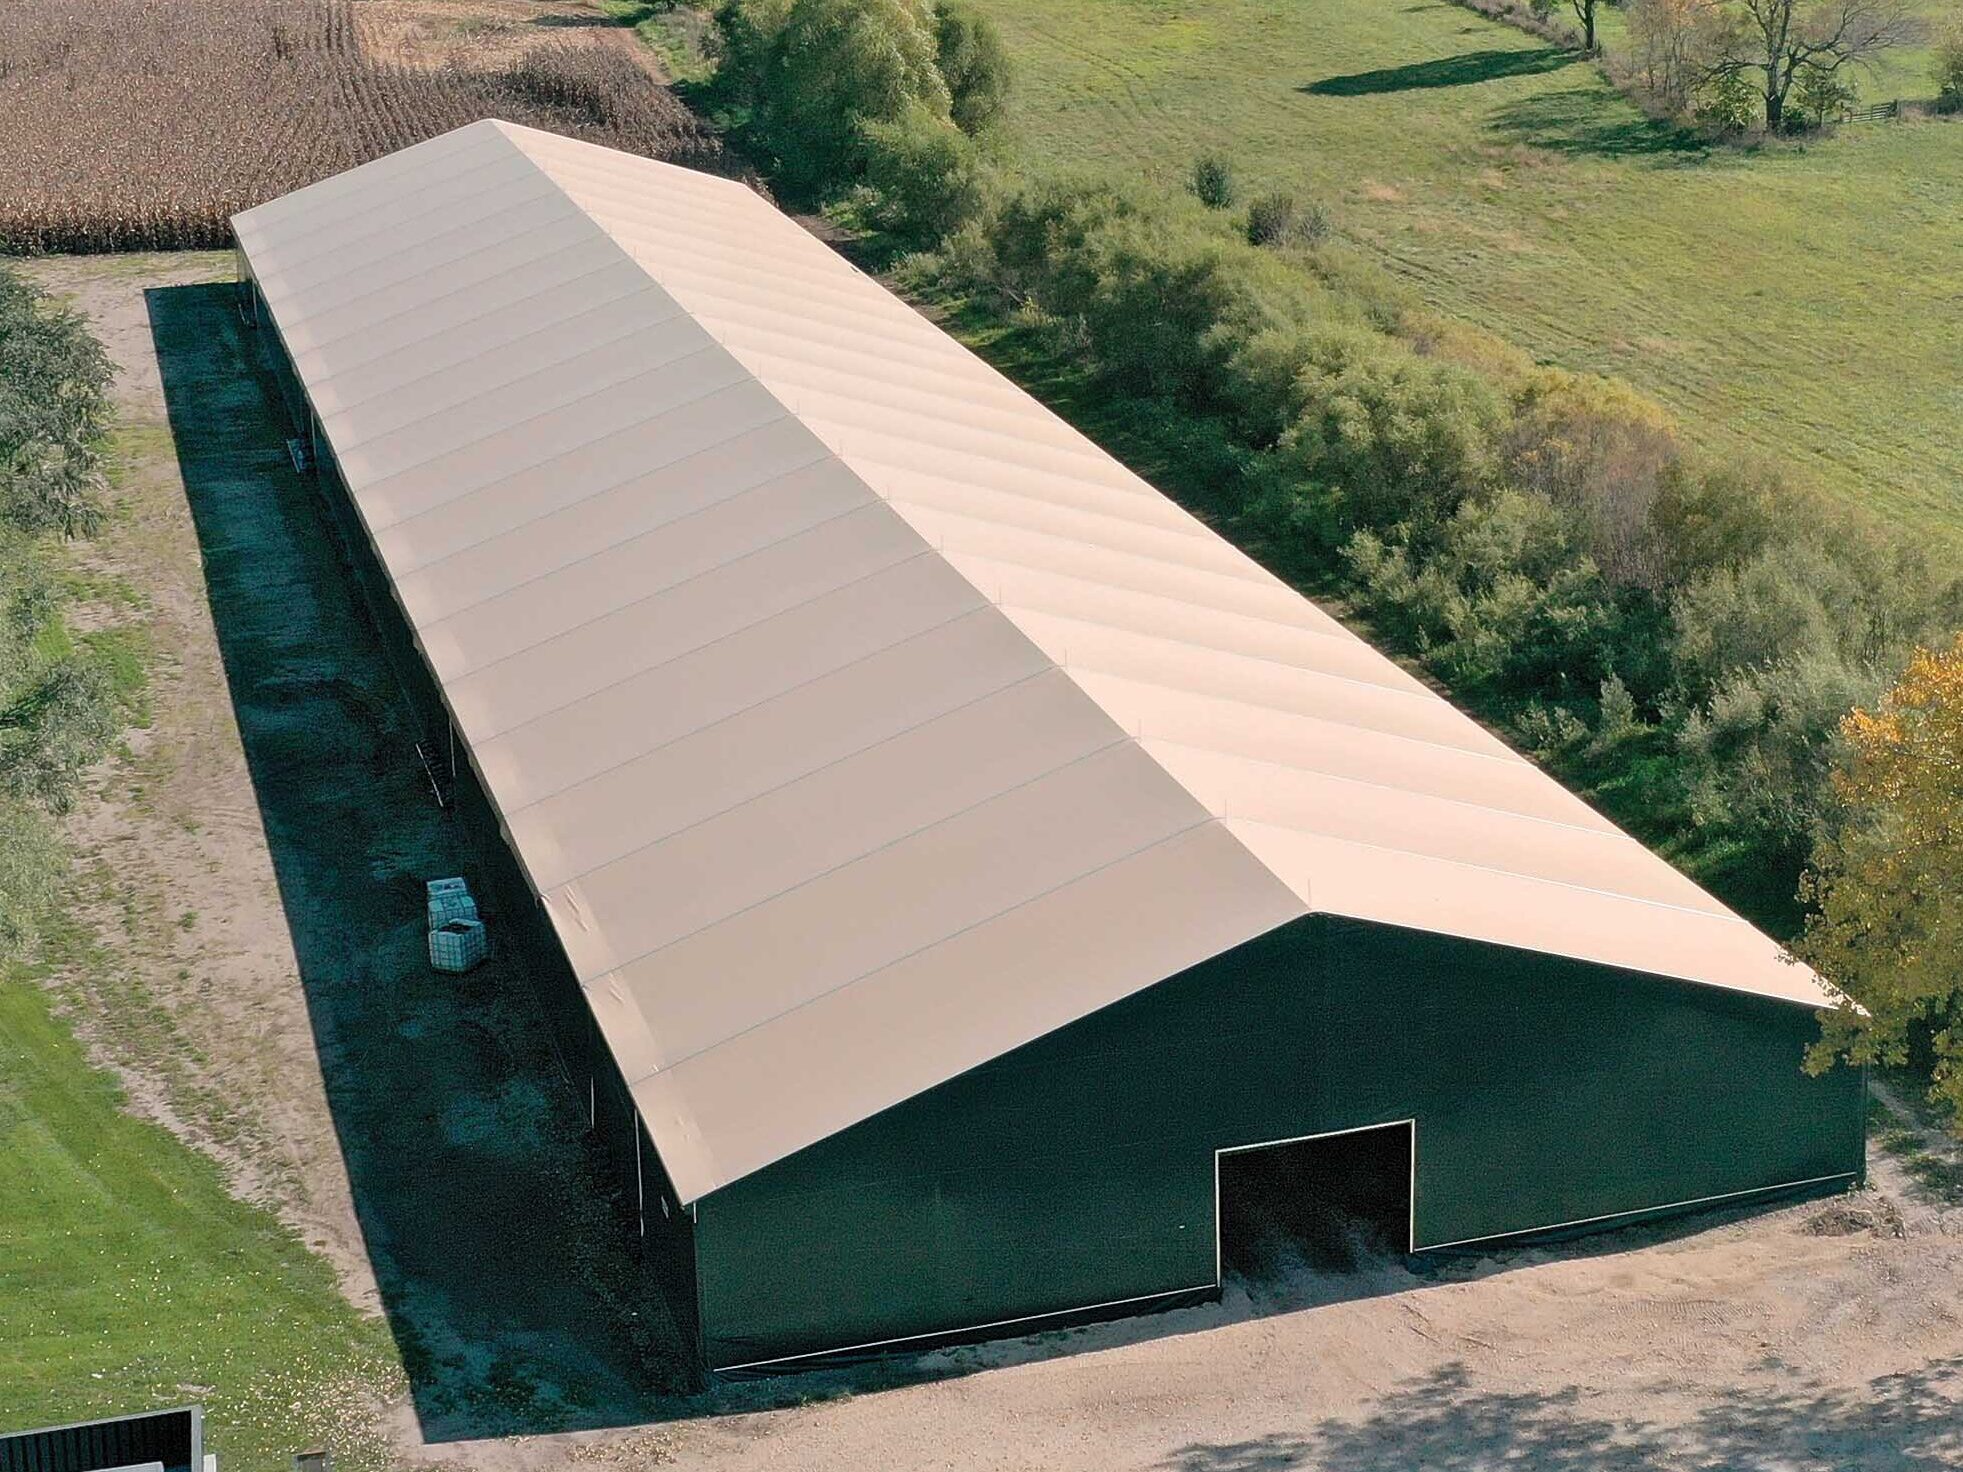 aerial view of shelter building with fabric roof